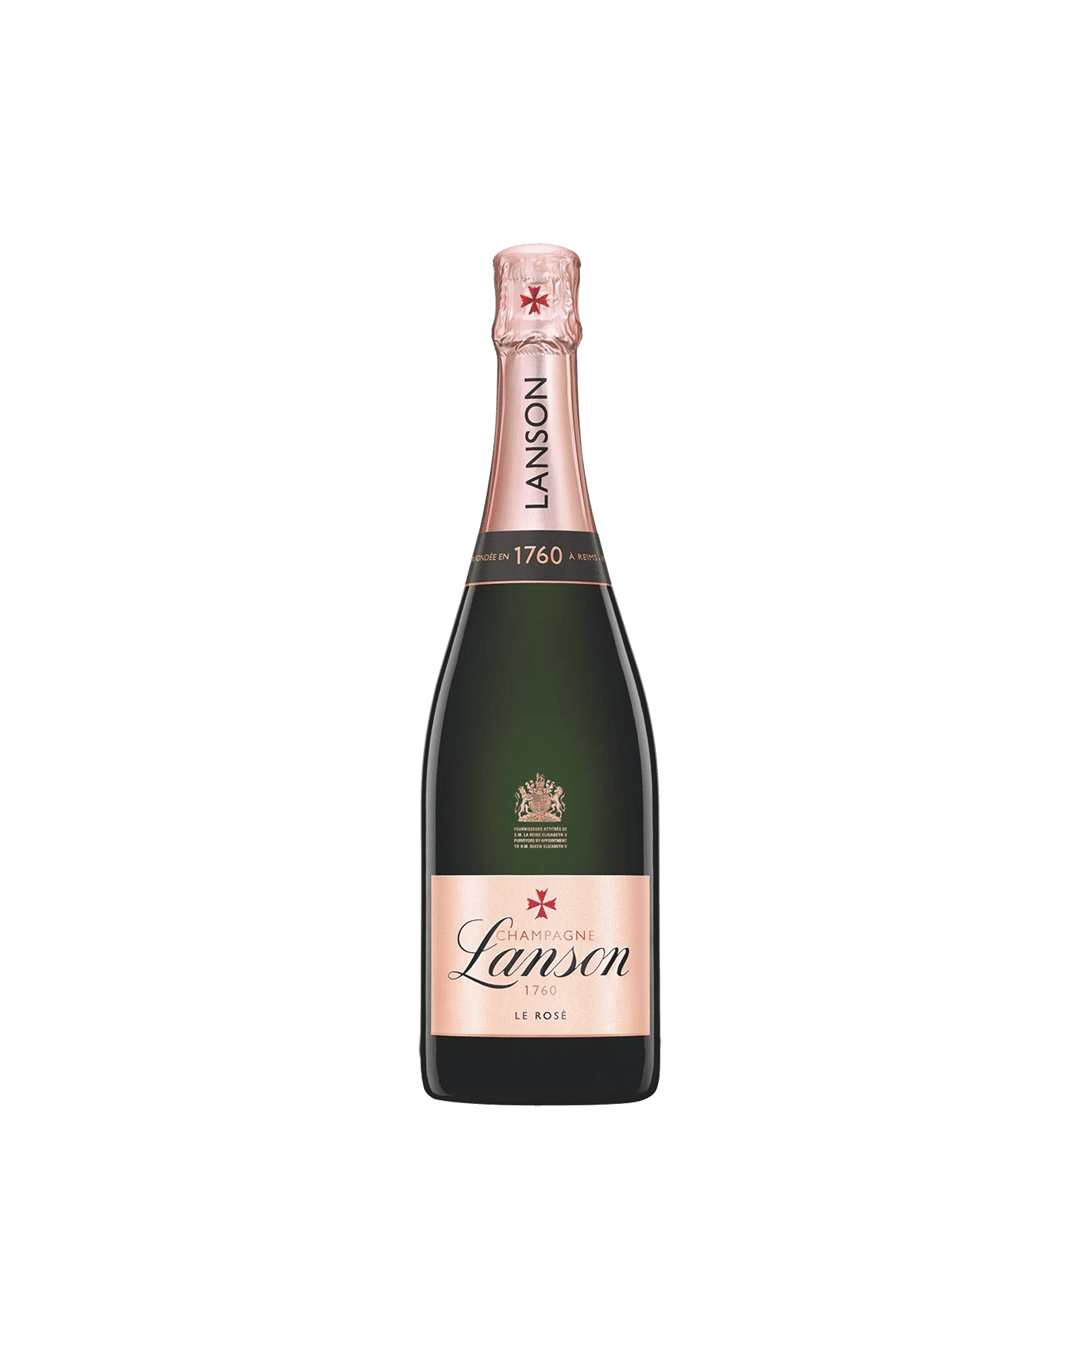 Buy Veuve Rozier Champagne Brut Nv online with (same-day FREE delivery ...